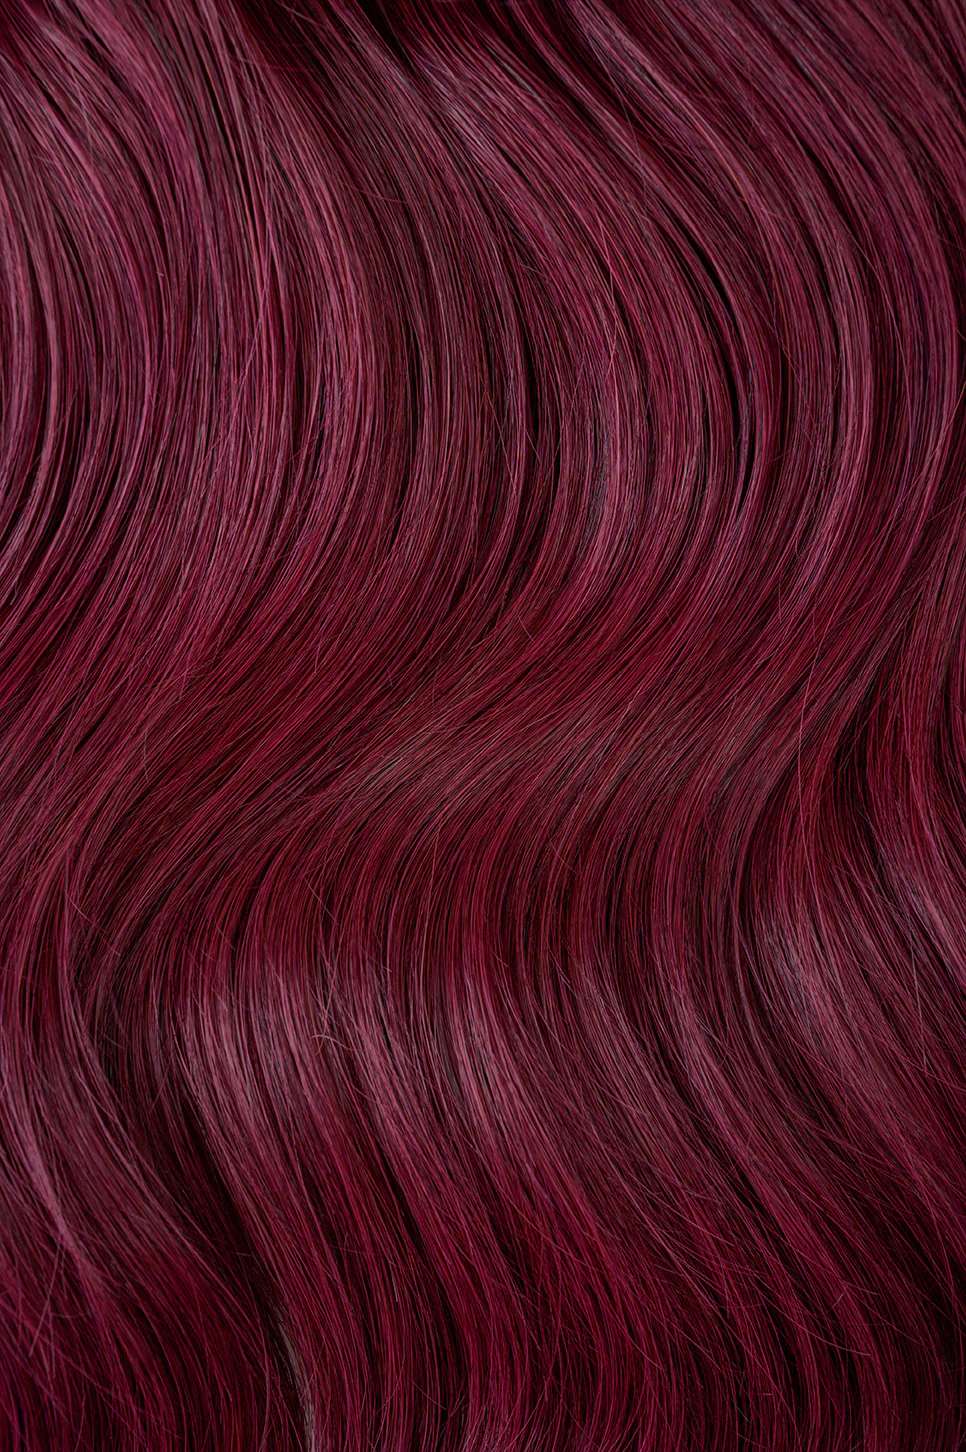 #Burgundy Traditional Weft Extensions